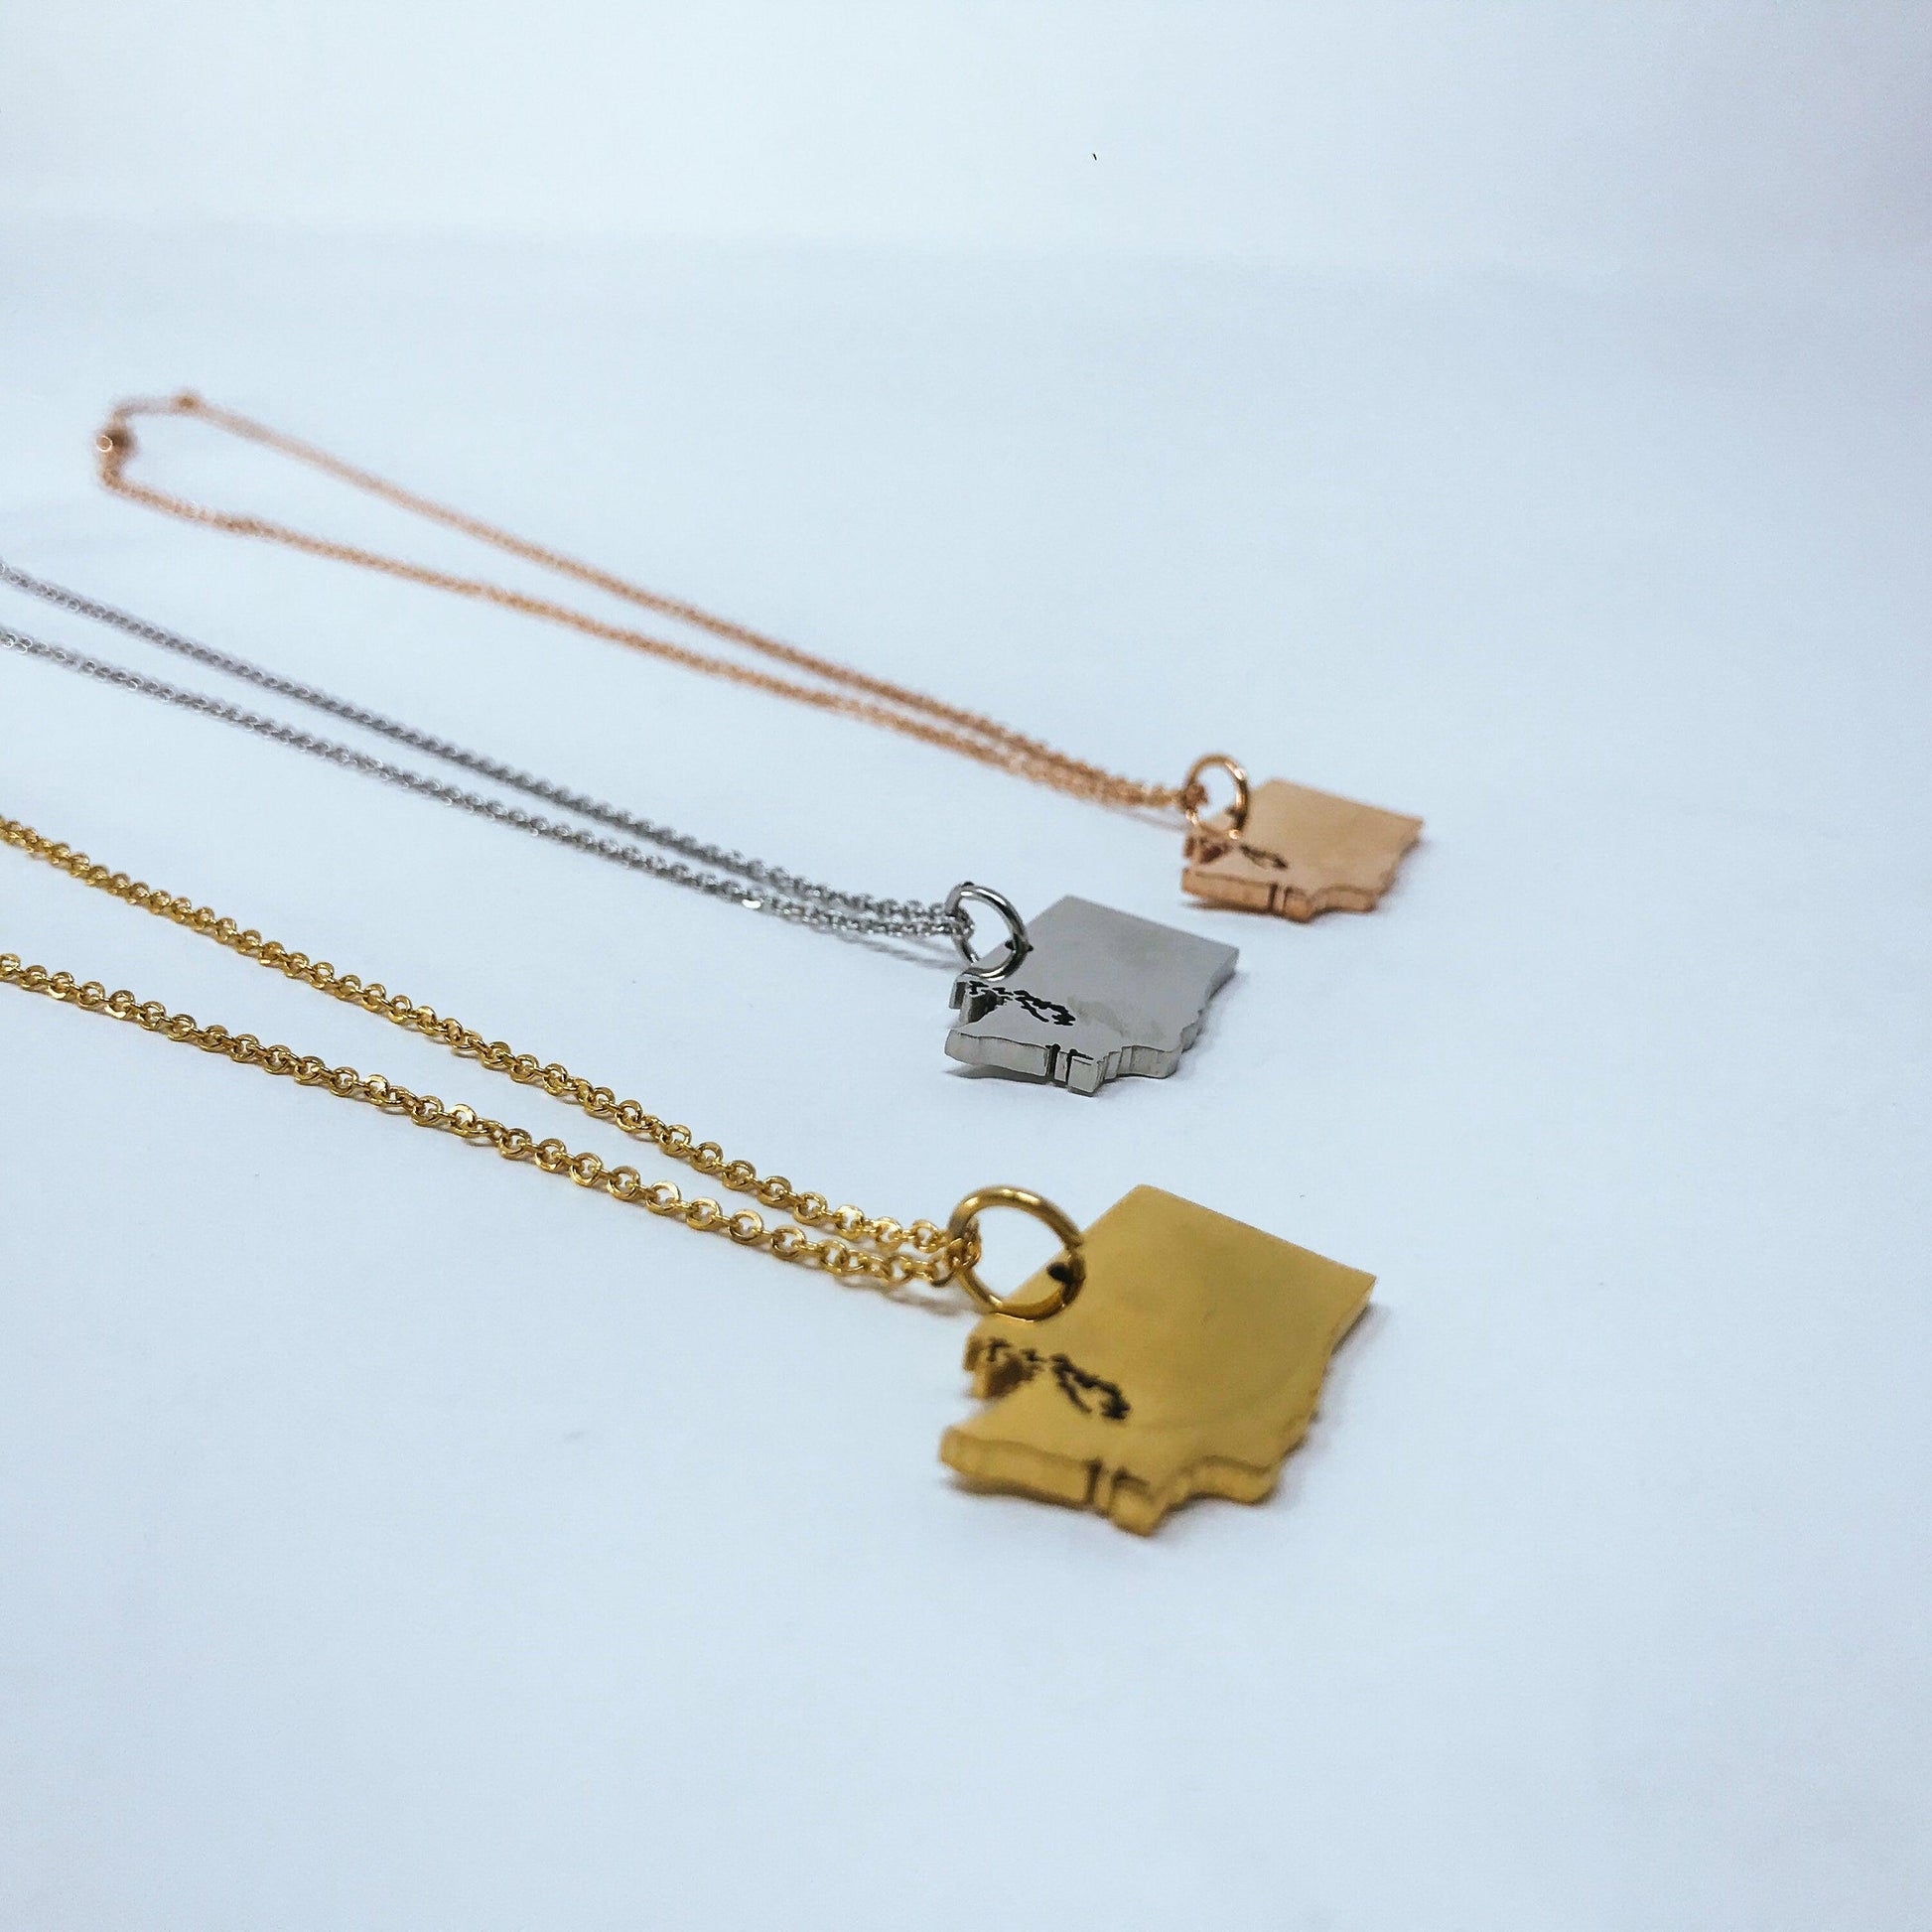 Washington State Silhouette Necklaces in 3 different colors: Gold, Silver & Rose Gold